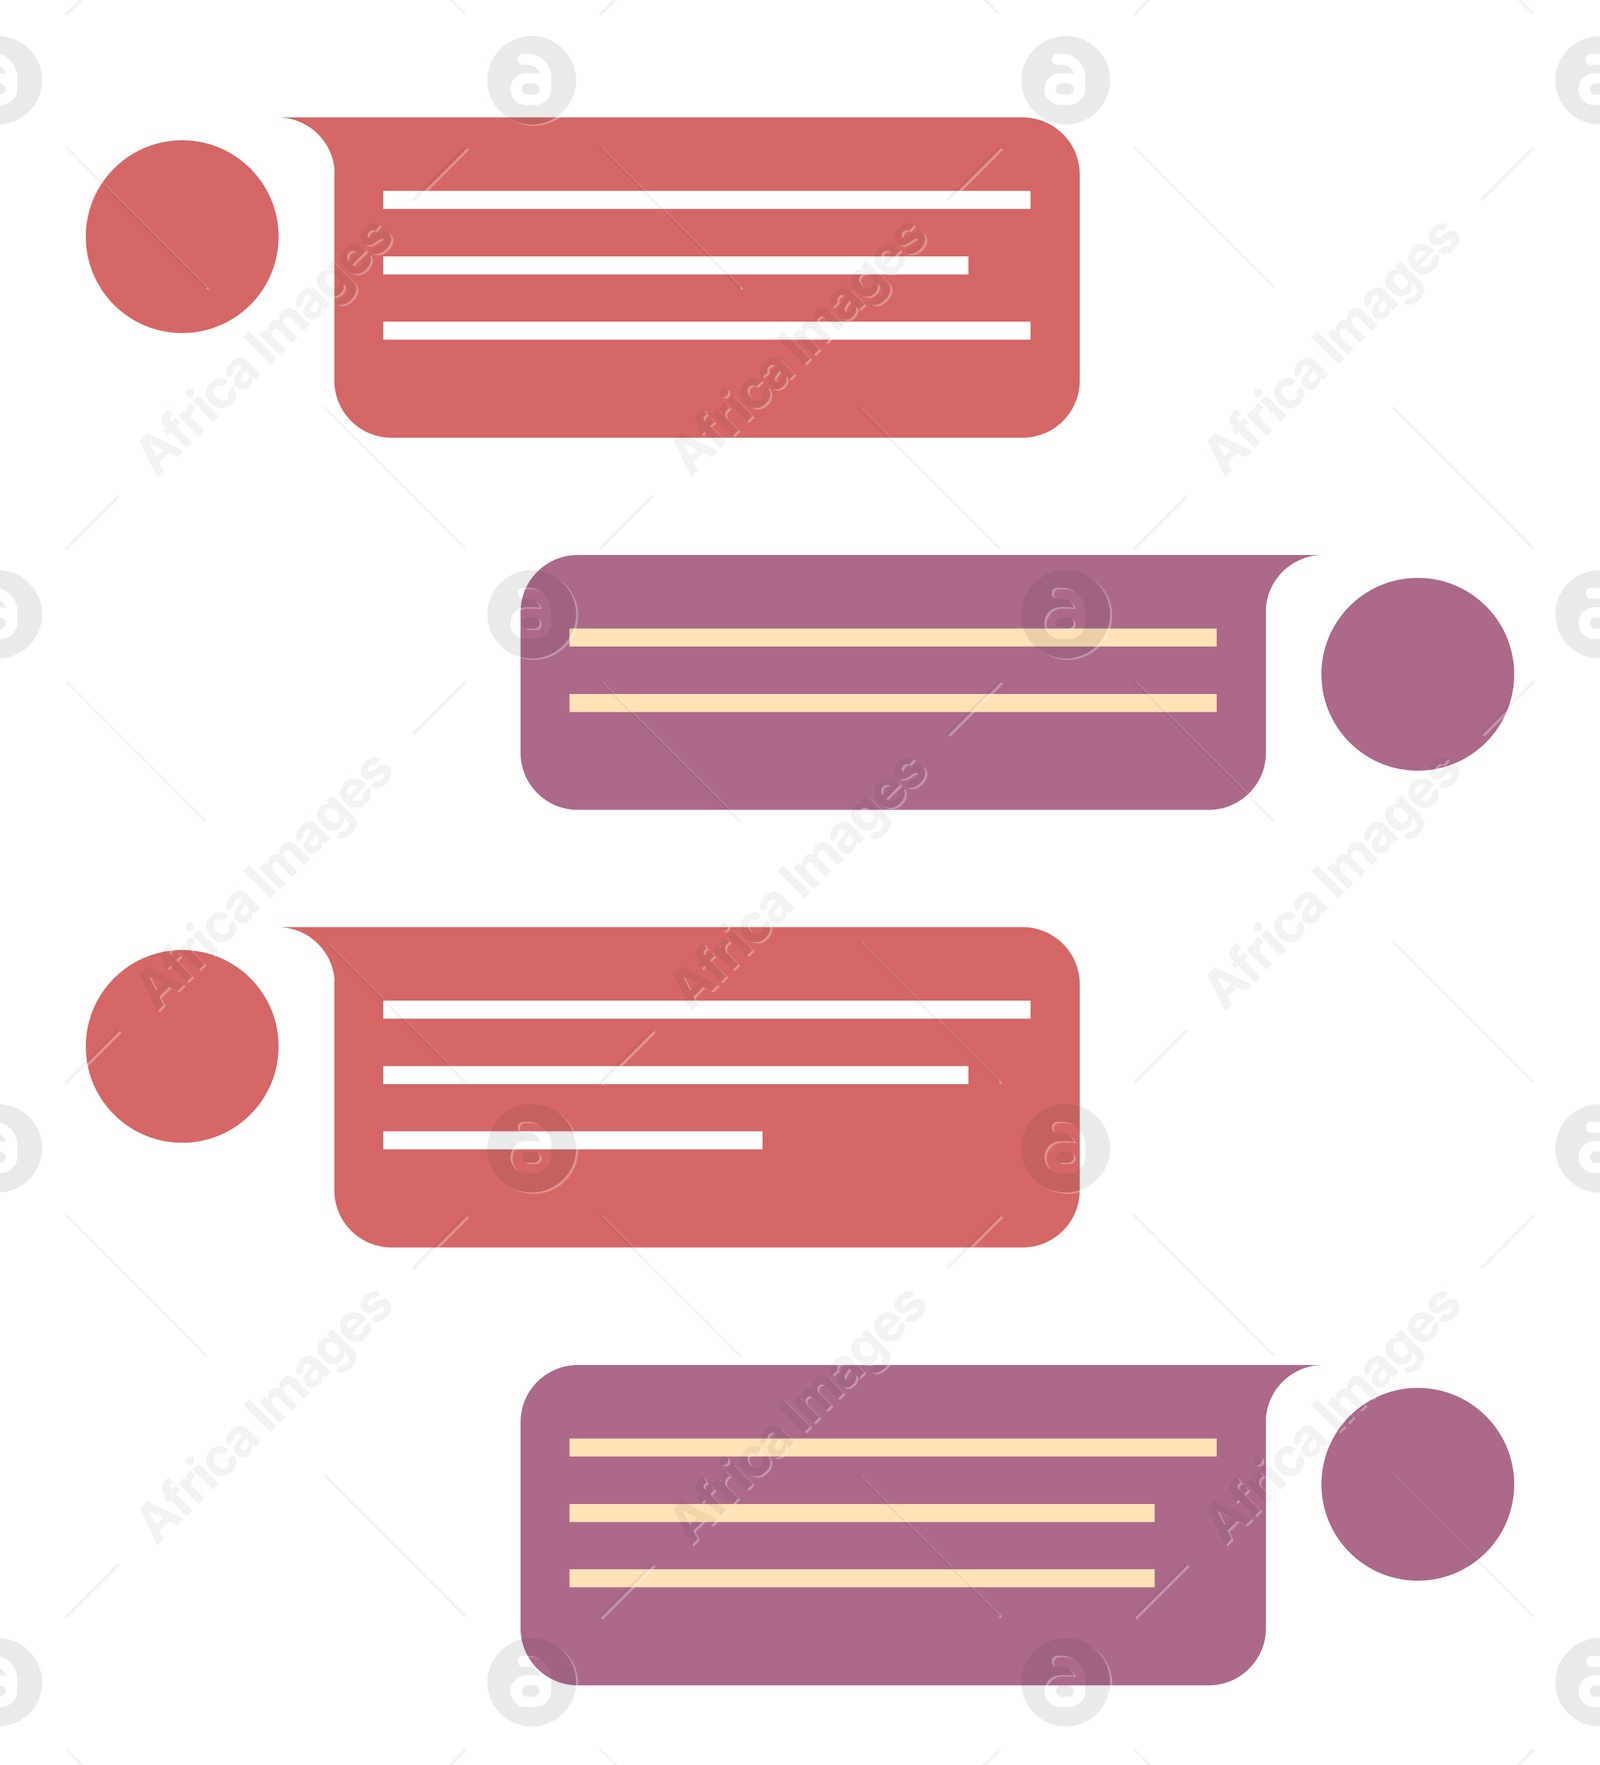 Image of Chat with message bubbles on white background